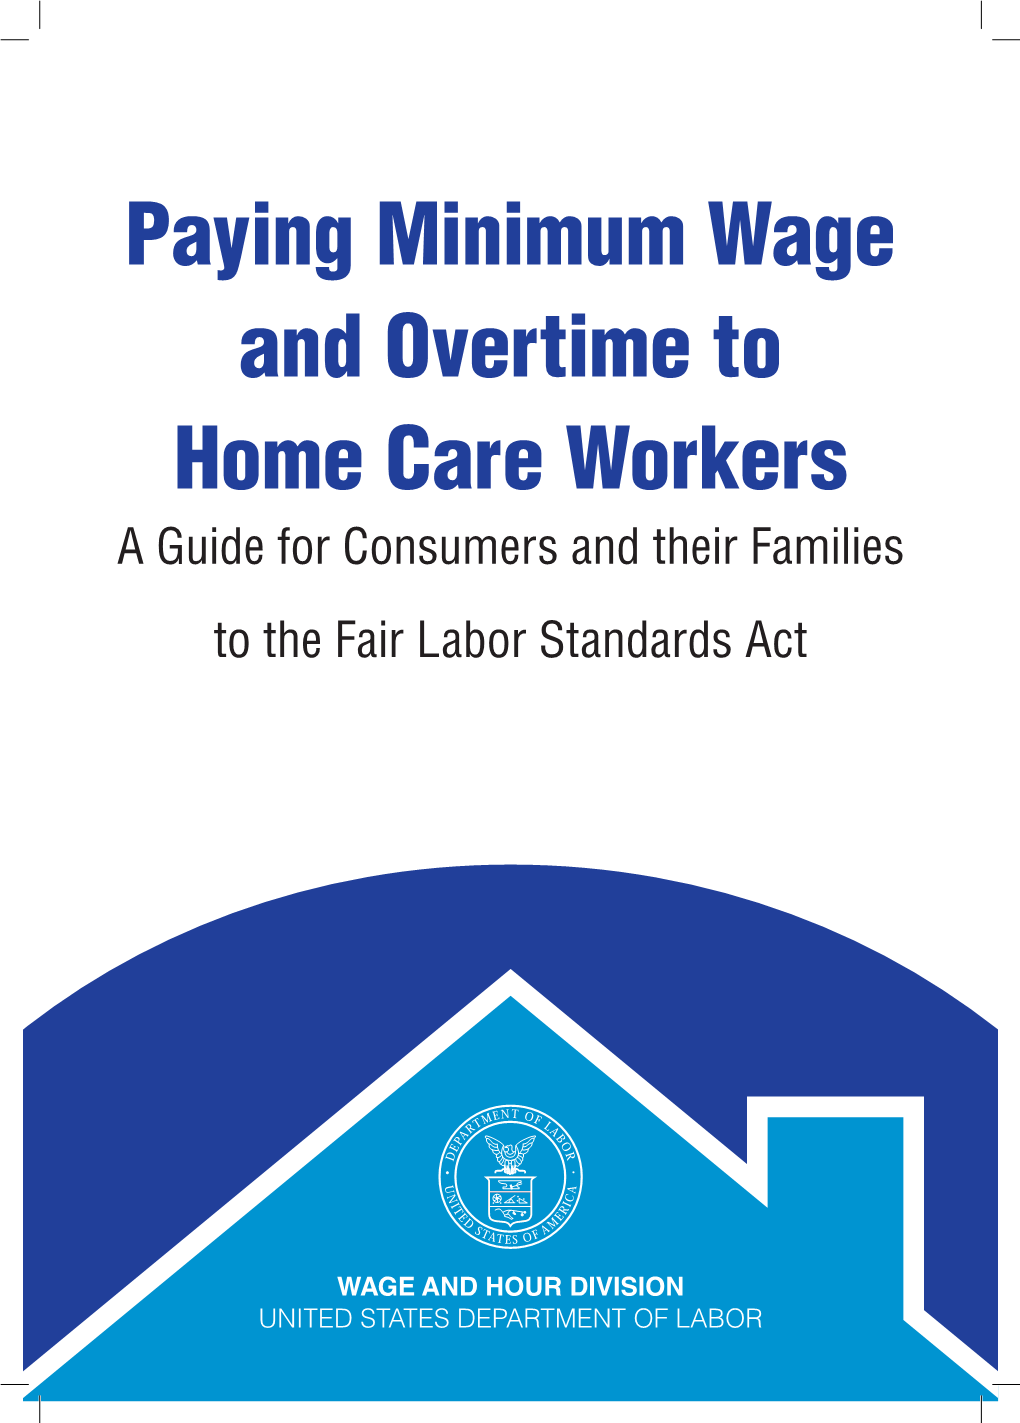 Paying Minimum Wage and Overtime to Home Care Workers a Guide for Consumers and Their Families to the Fair Labor Standards Act